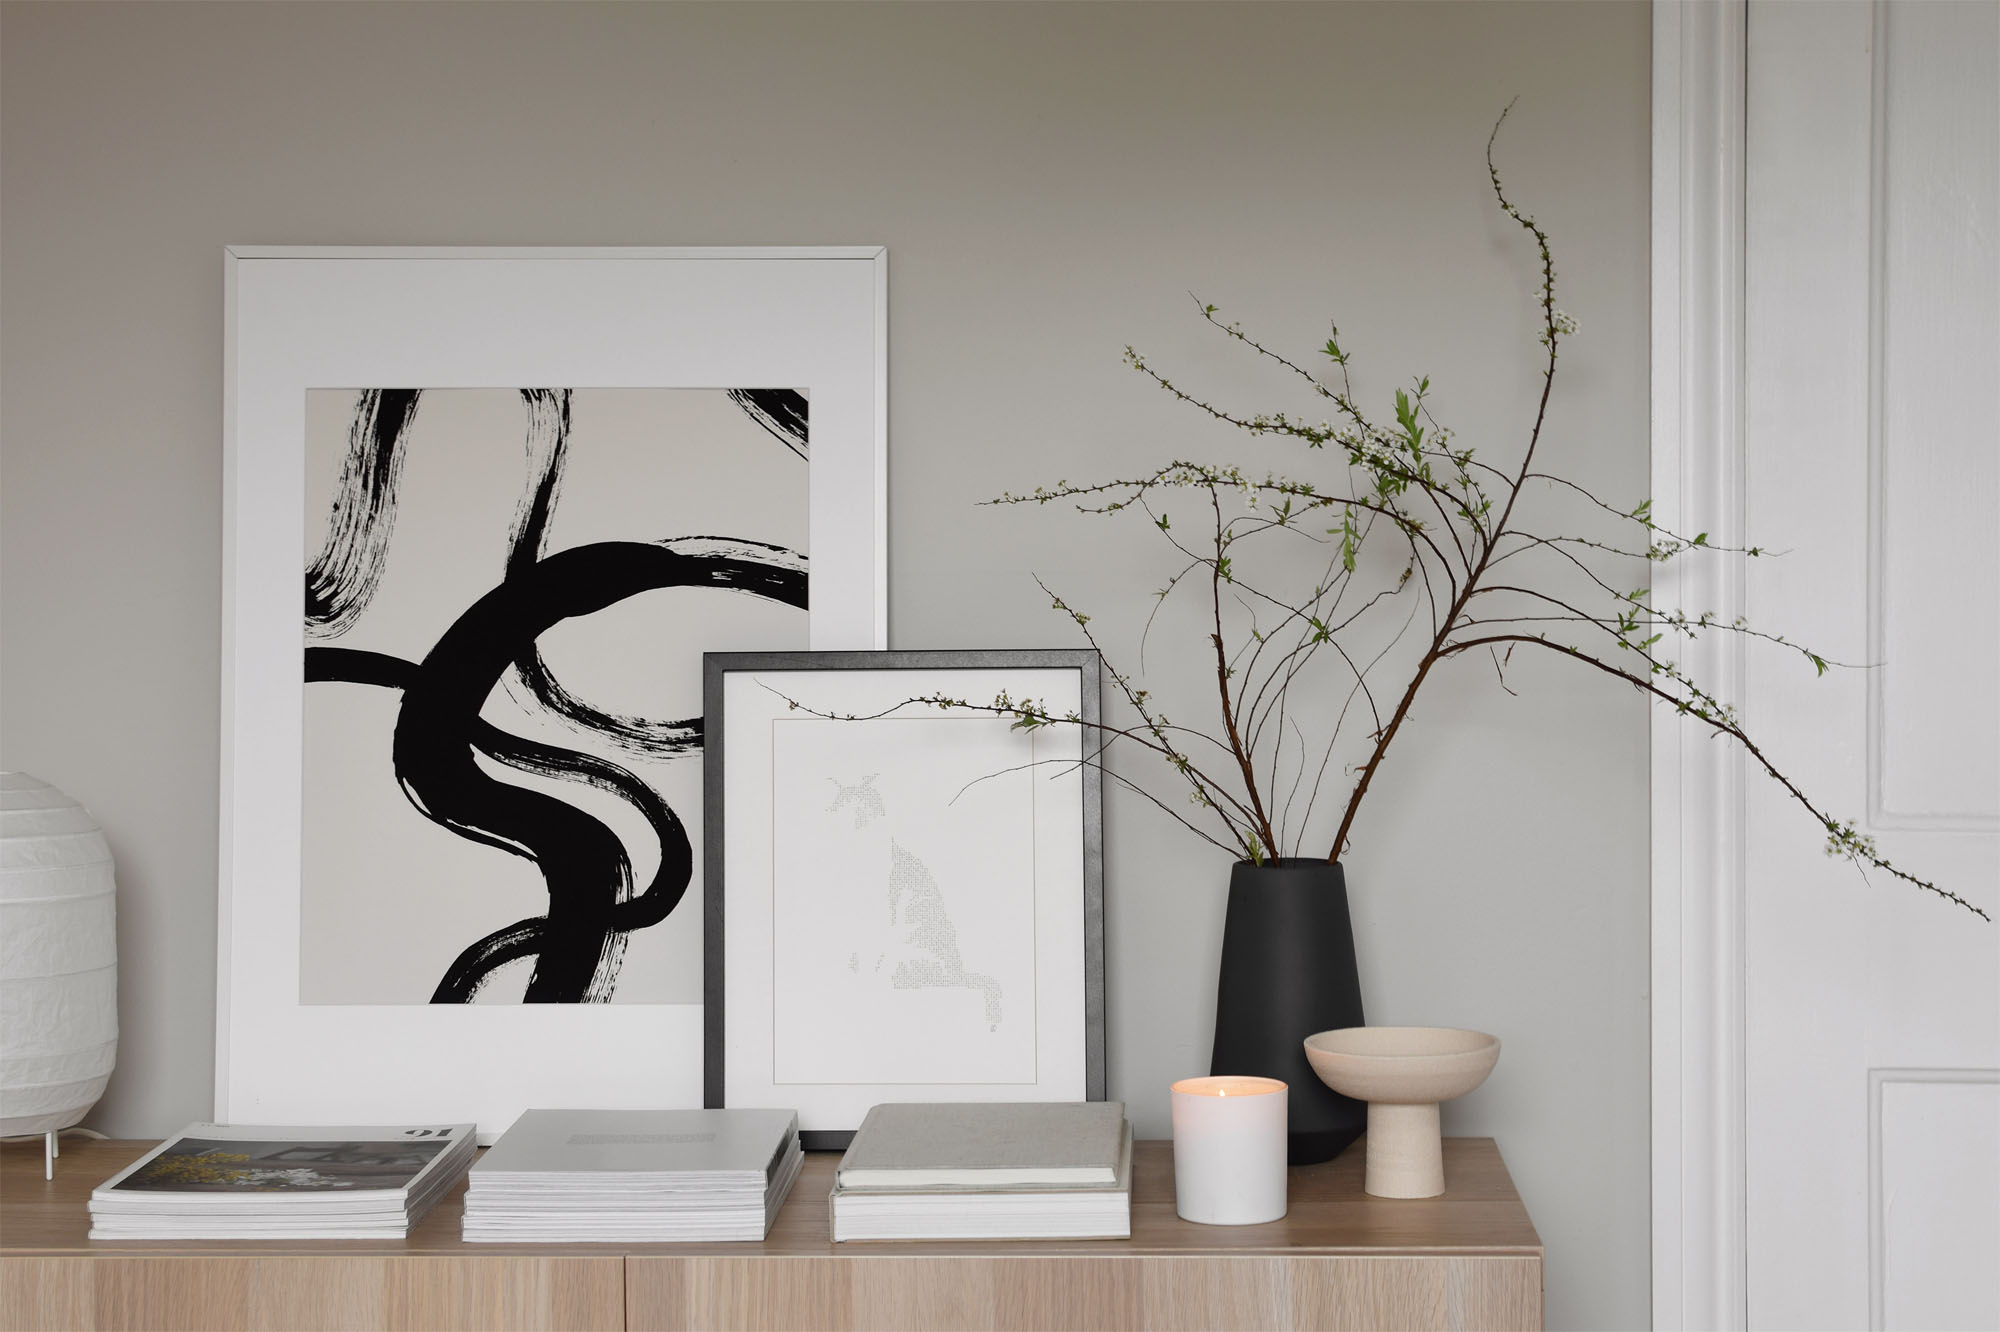 Neutral interior with blossom branches, minimalist sideboard styling, soft grey-green walls and abstract art | The best scented candles for spring | These Four Walls blog